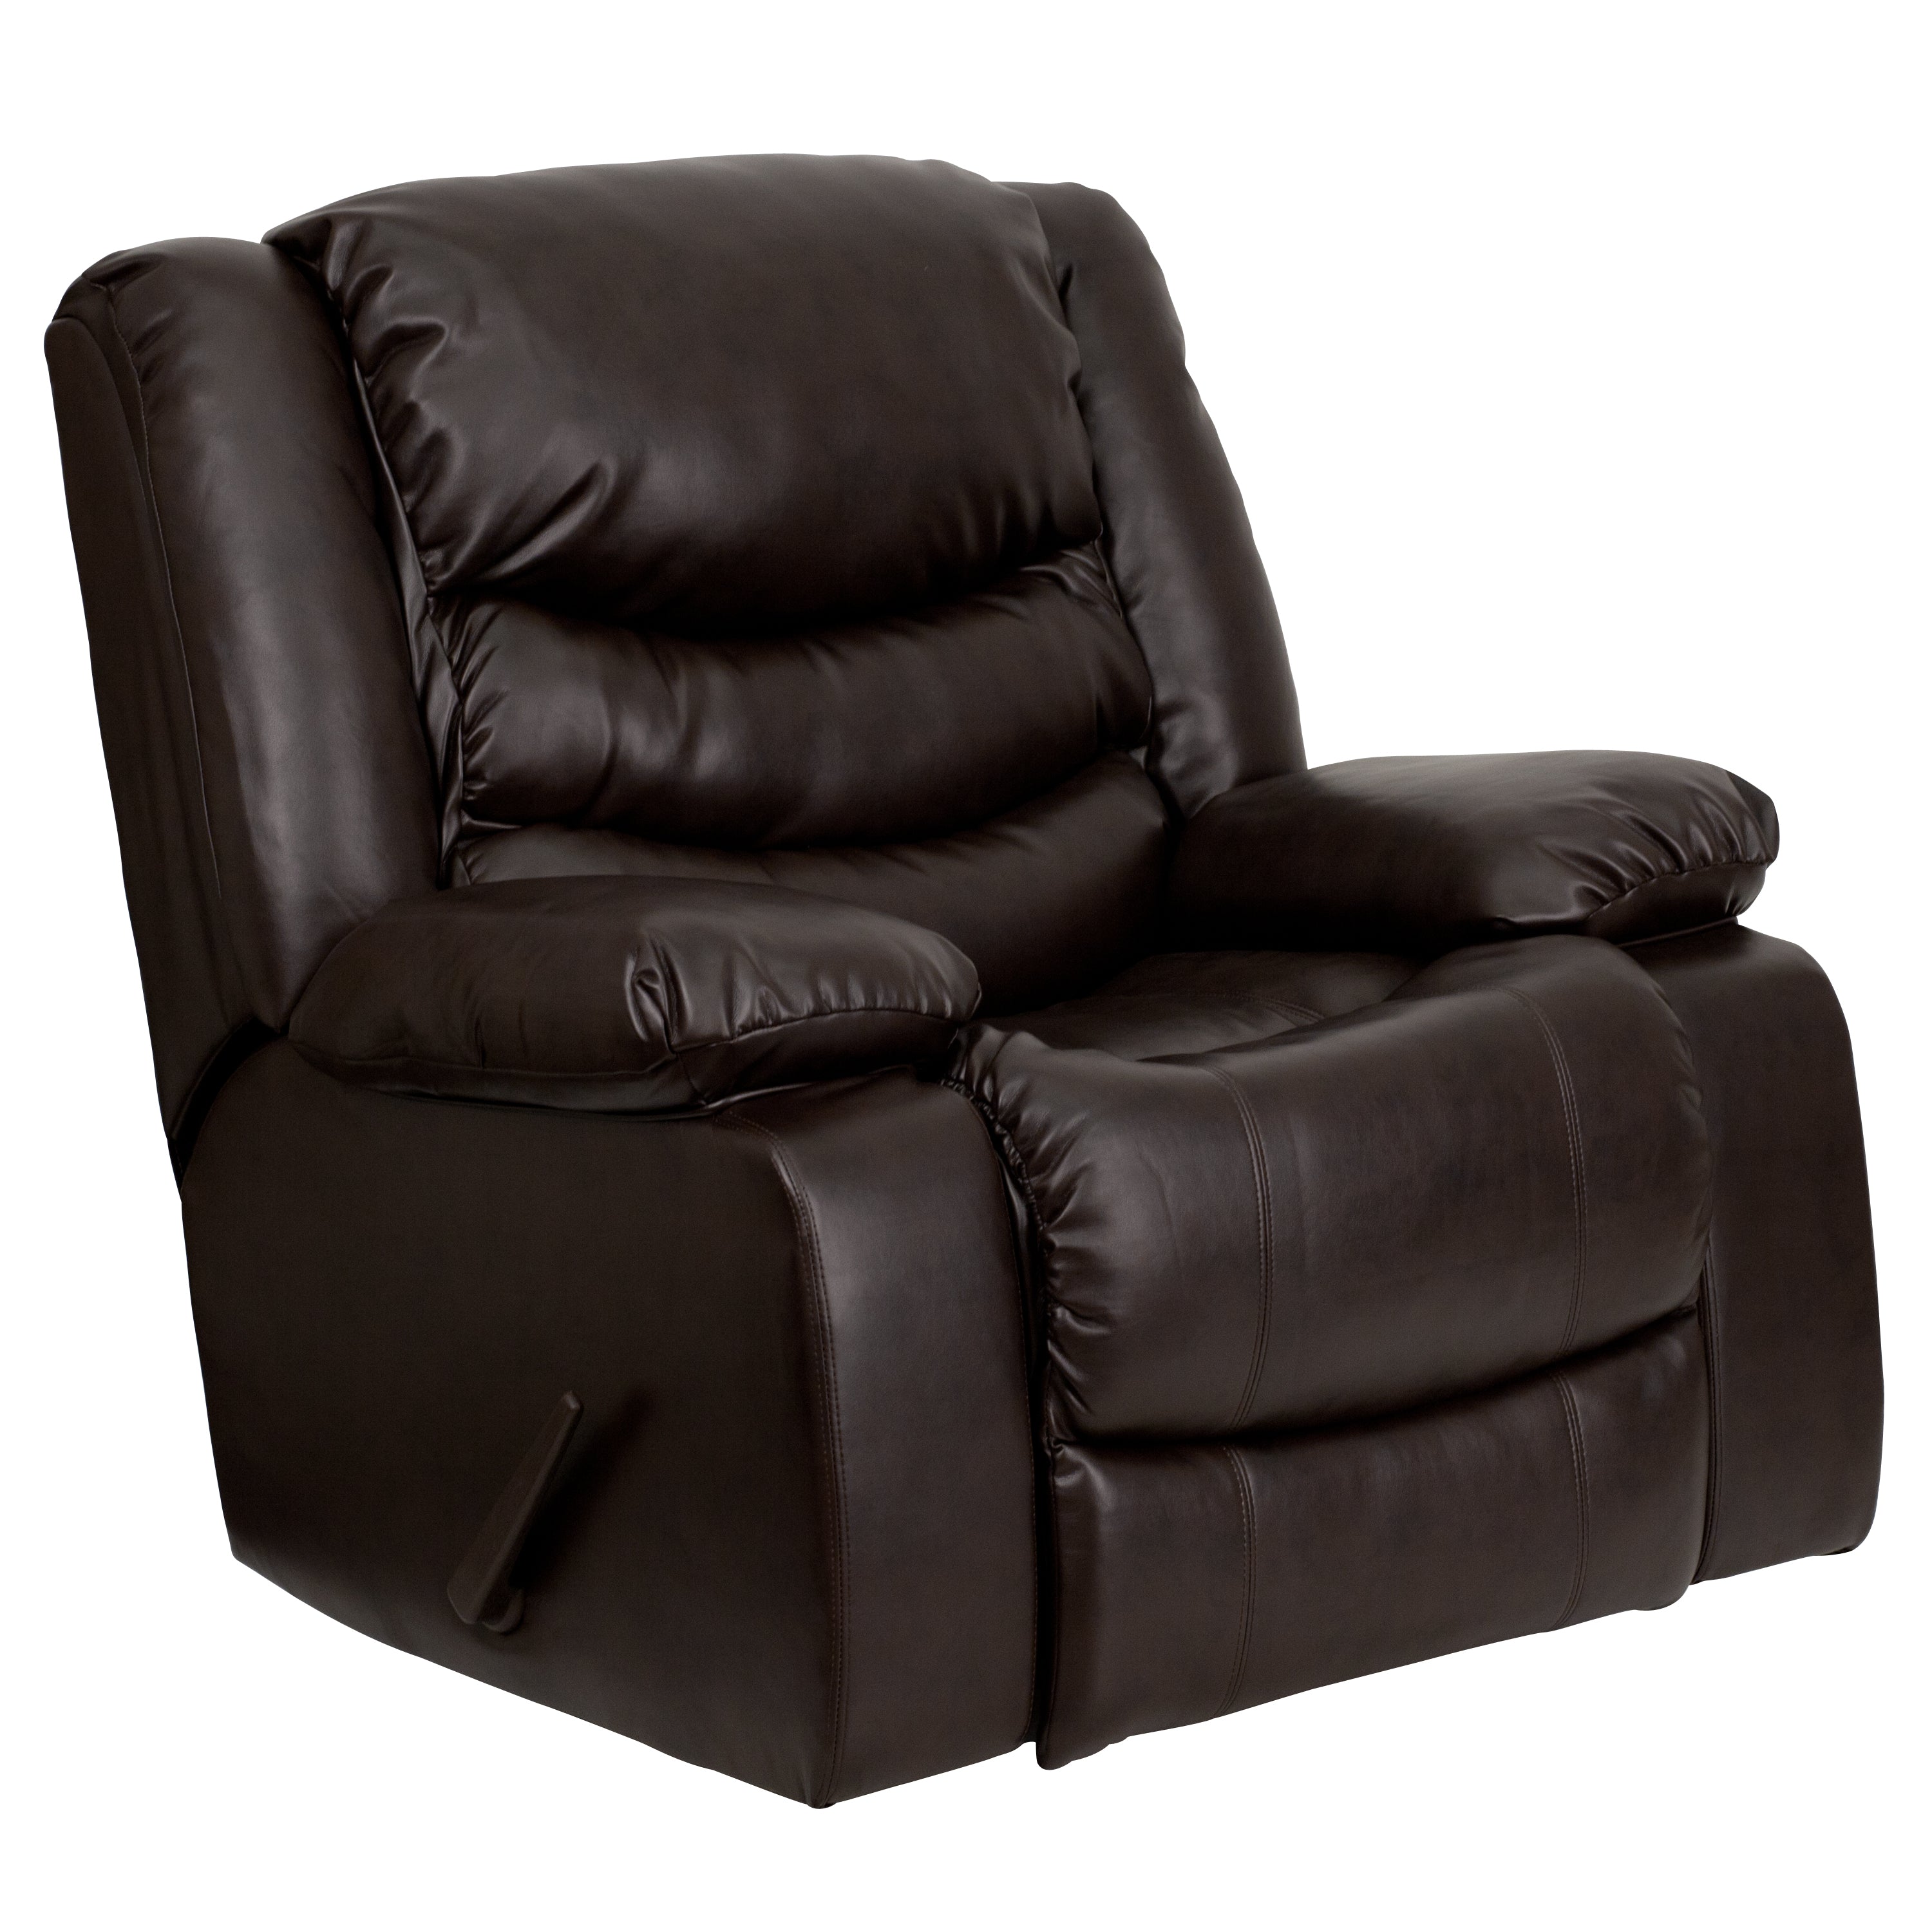 Plush LeatherSoft Lever Rocker Recliner with Padded Arms-Recliner-Flash Furniture-Wall2Wall Furnishings